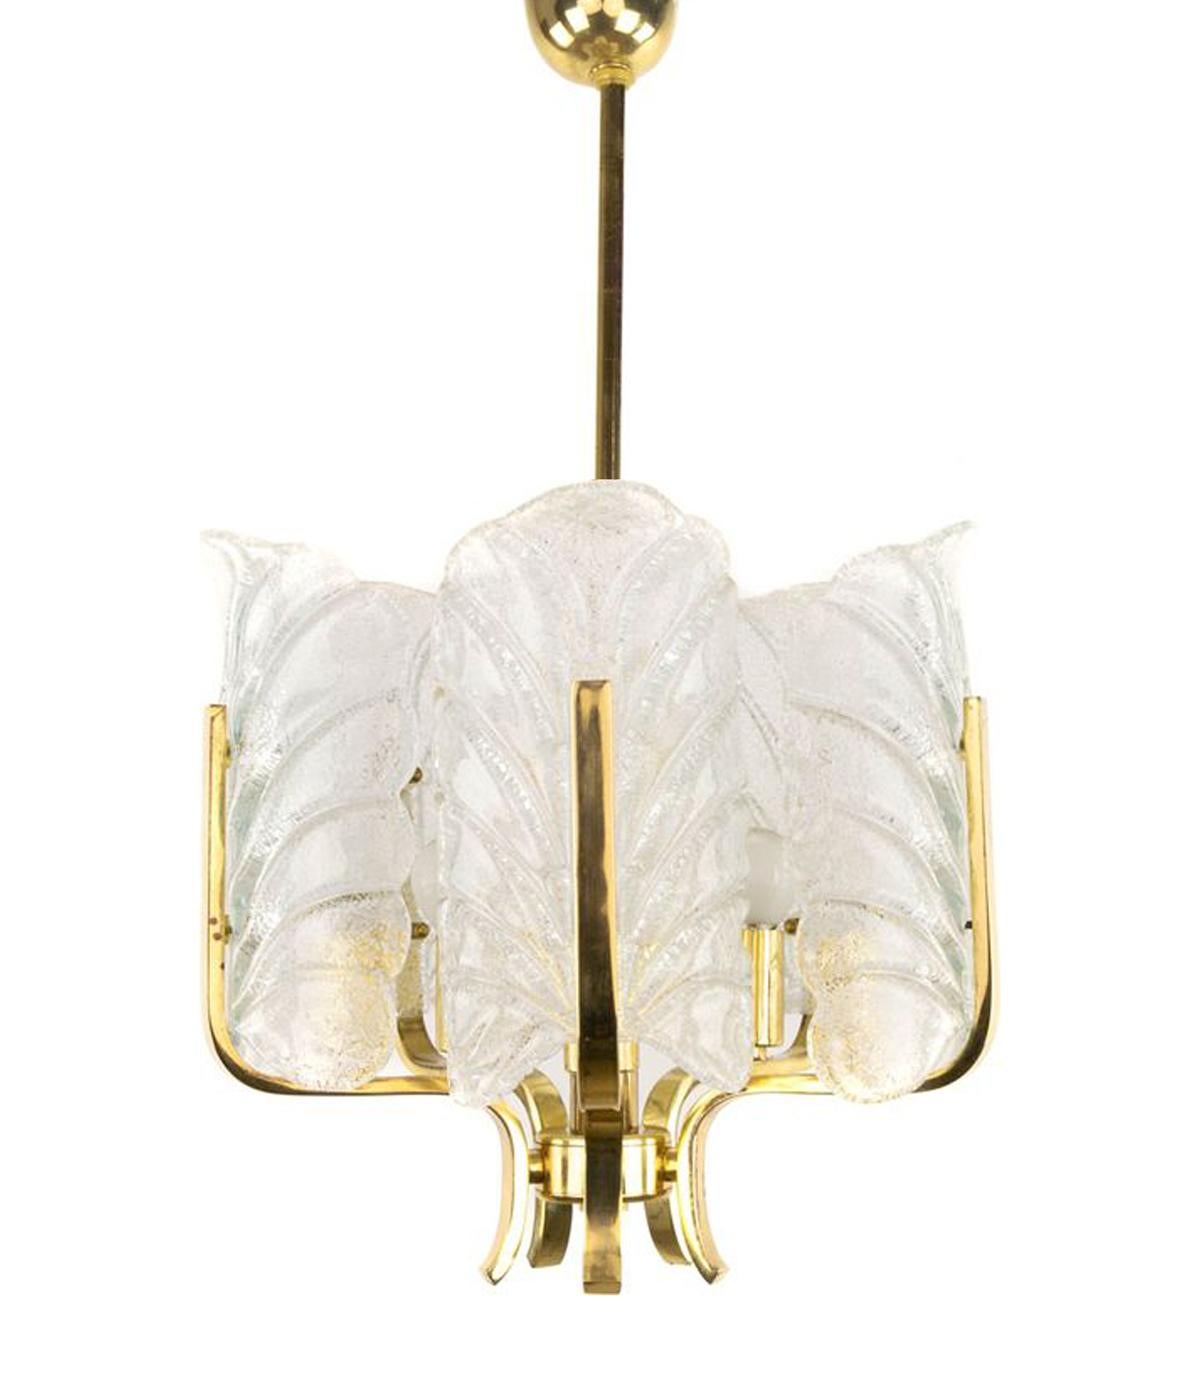 A mid-century ceiling light with 5 brass arms and crystal glass leaf light diffusers. Designed by Carl Fagerlund and manufactured by Orrefors of Sweden in the 1960s. Hollywood Regency style. The frosted glass leaves omit a wonderful glow, and this